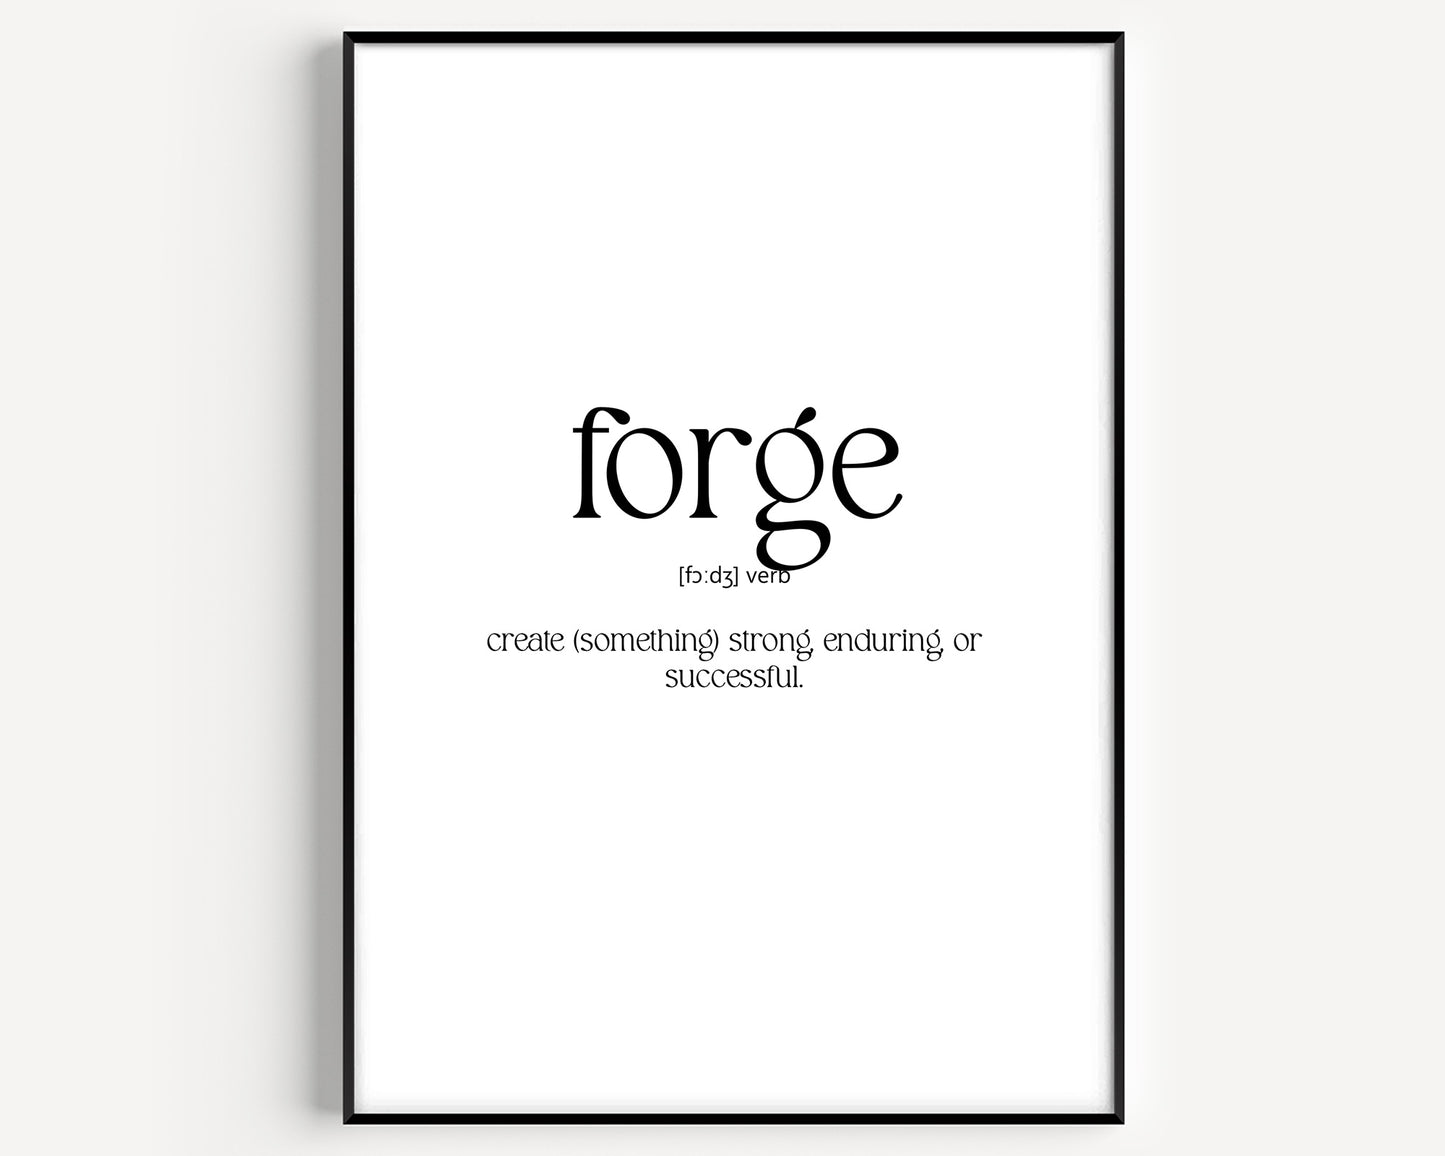 Forge Definition Print - Magic Posters